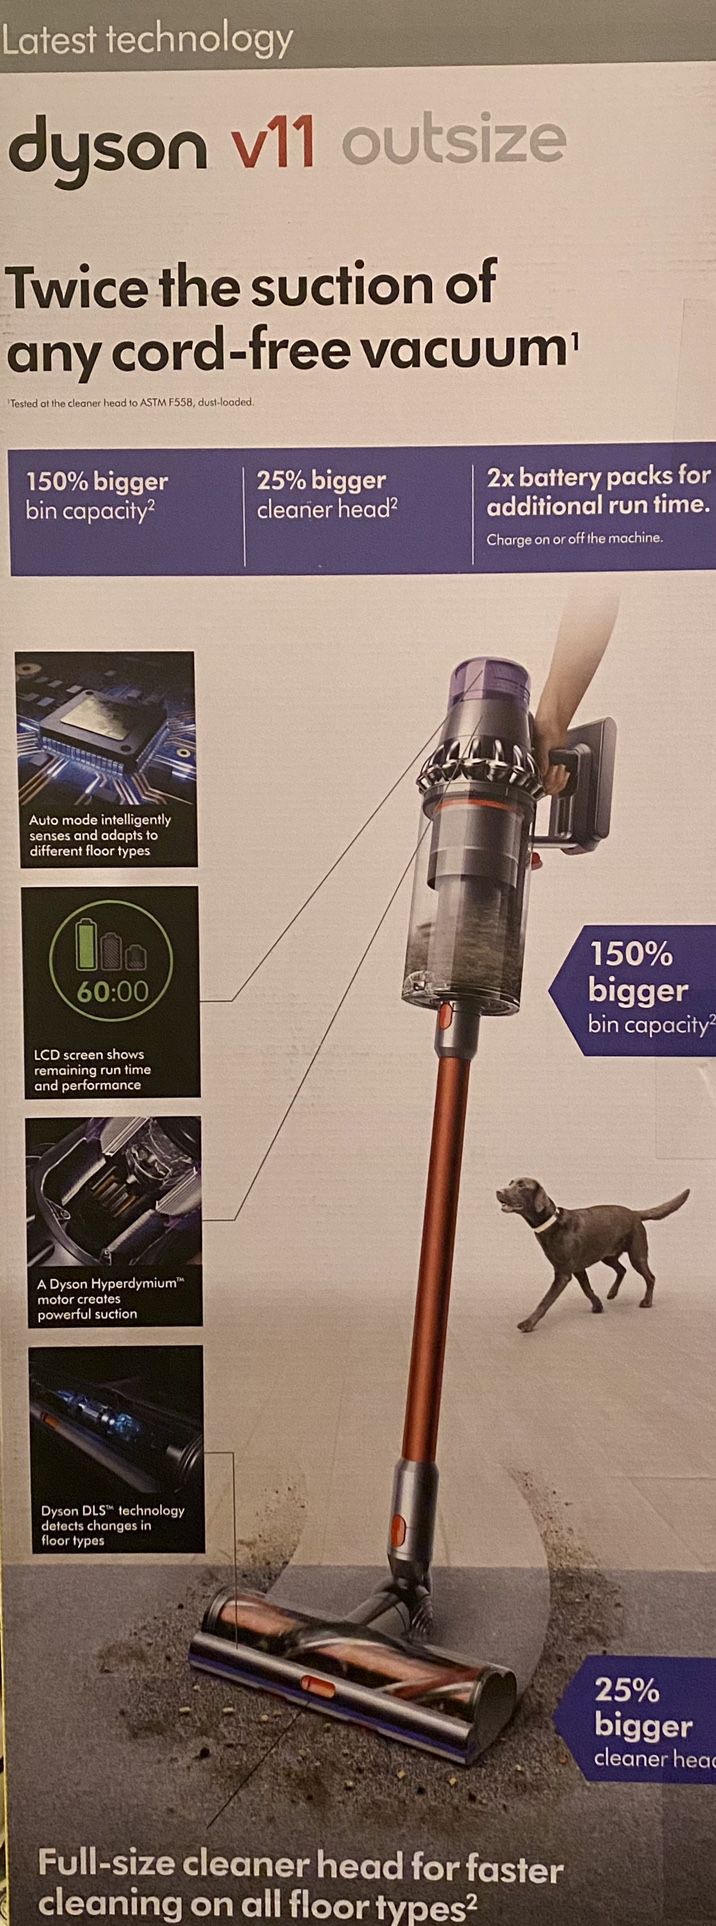 Dyson V11™ Outsize cordless vacuum | Model 298706-01 Retail price in stores: $799.99 plus tax (8.5%) = $867.98 My price: $500 ***Brand new in box /